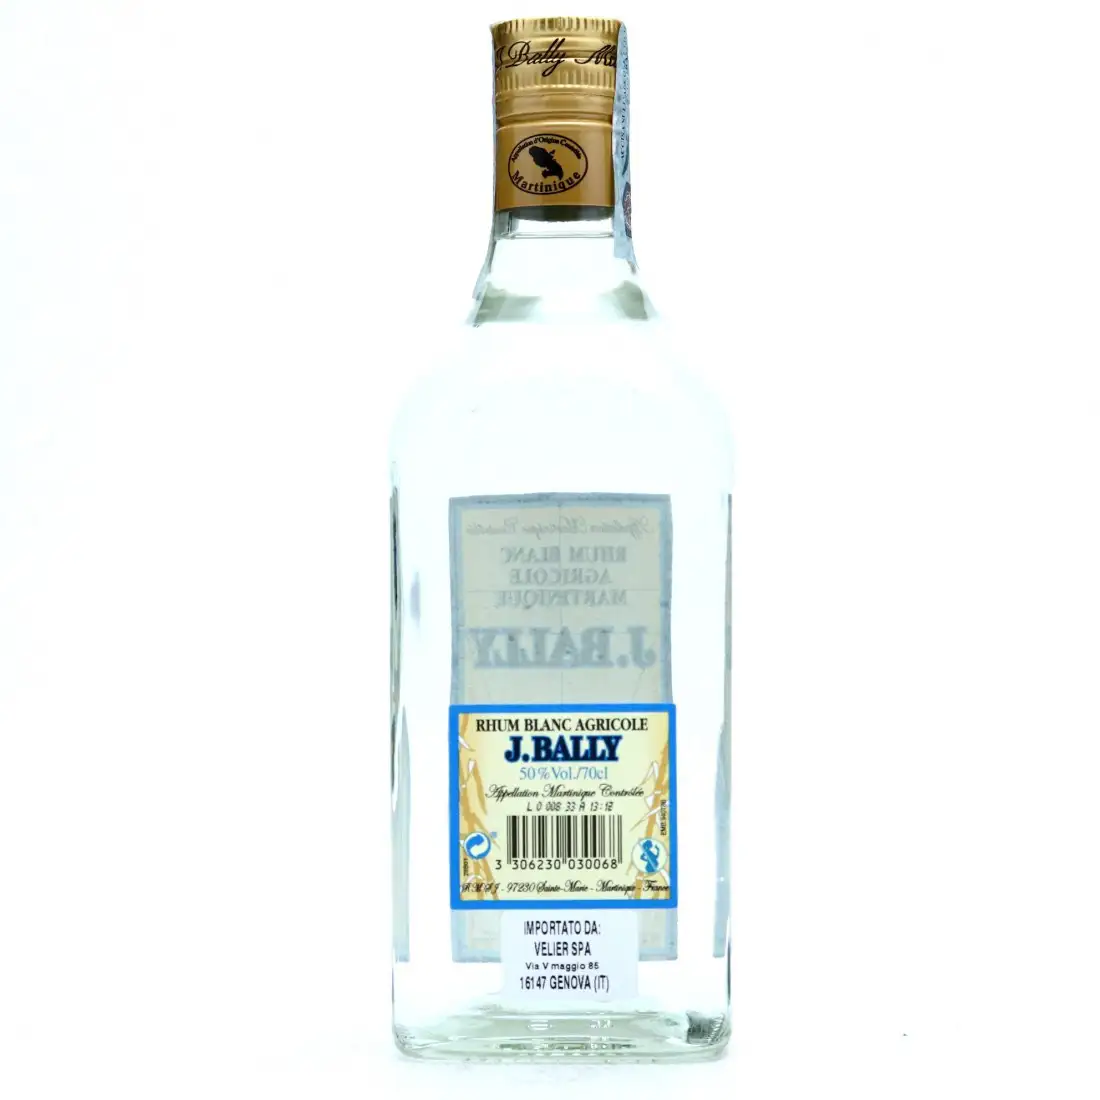 Image of the front of the bottle of the rum Rhum Blanc